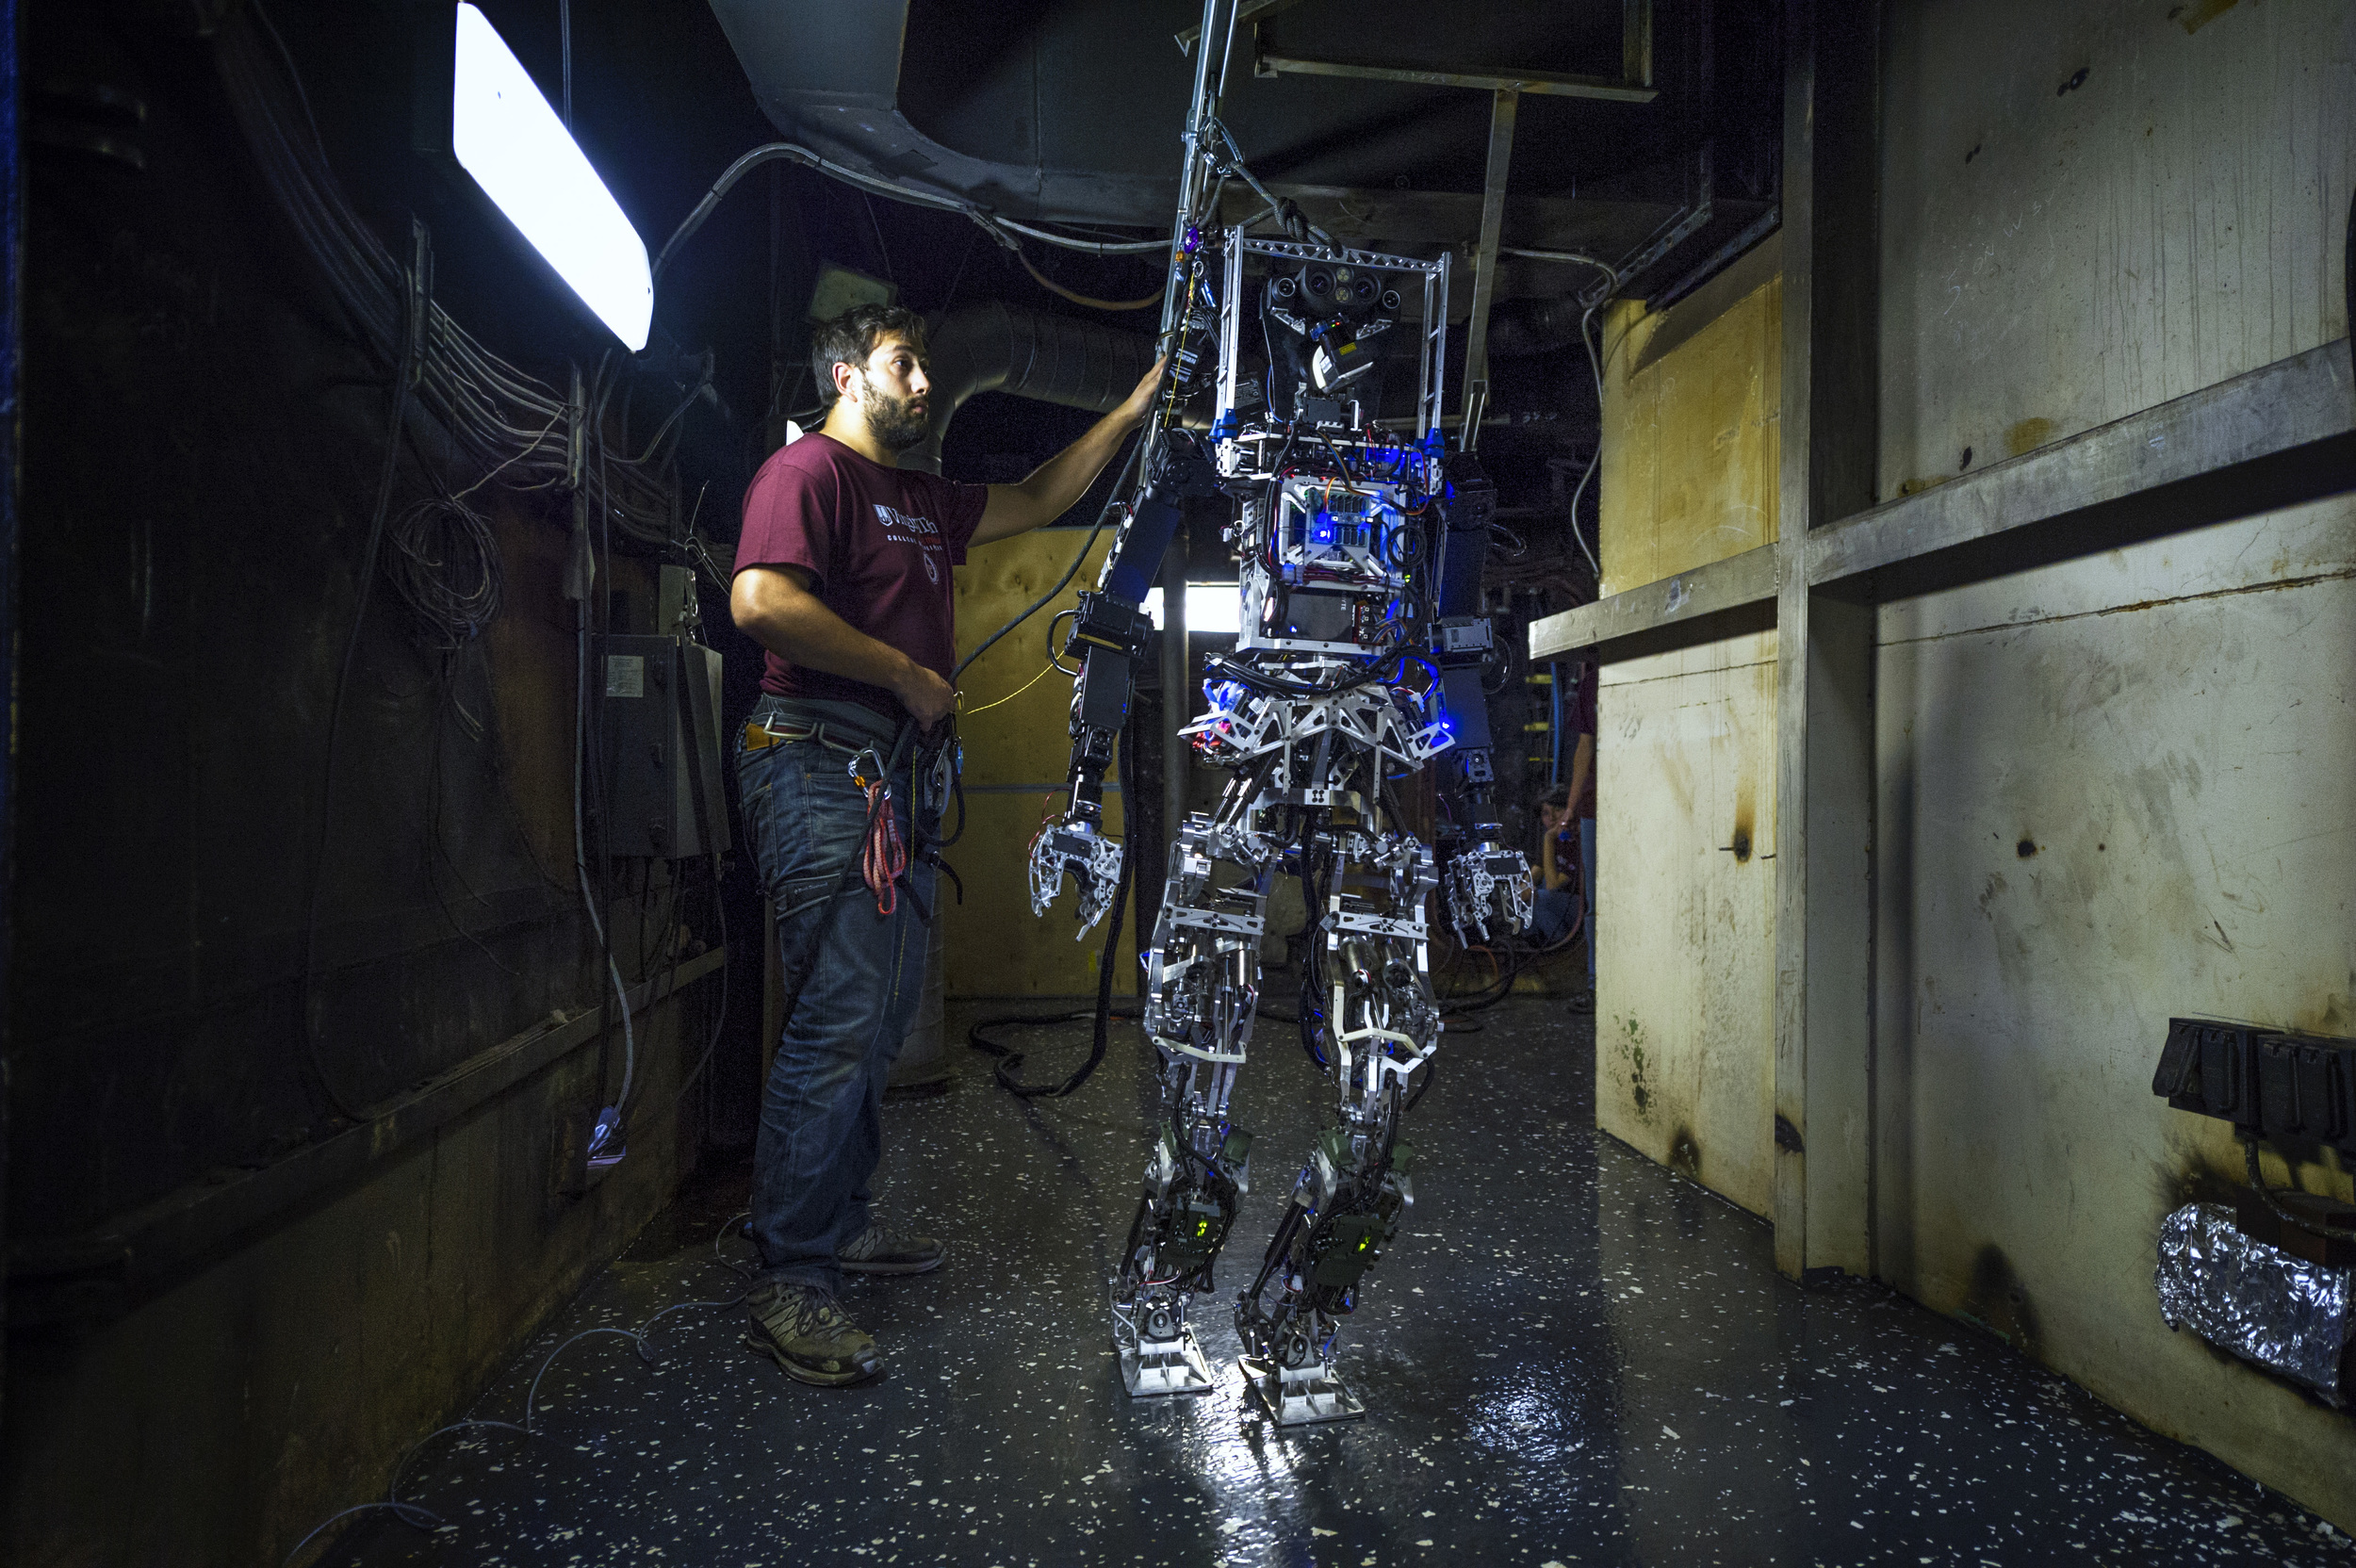   MOBILE, Ala  . - John Seminatore, a graduate student at Virginia Tech, secures the Office of Naval Research-sponsored Shipboard Autonomous Firefighting Robot (SAFFiR) during testing aboard the Naval Research Laboratory's ex-USS Shadwell in Mobile, 